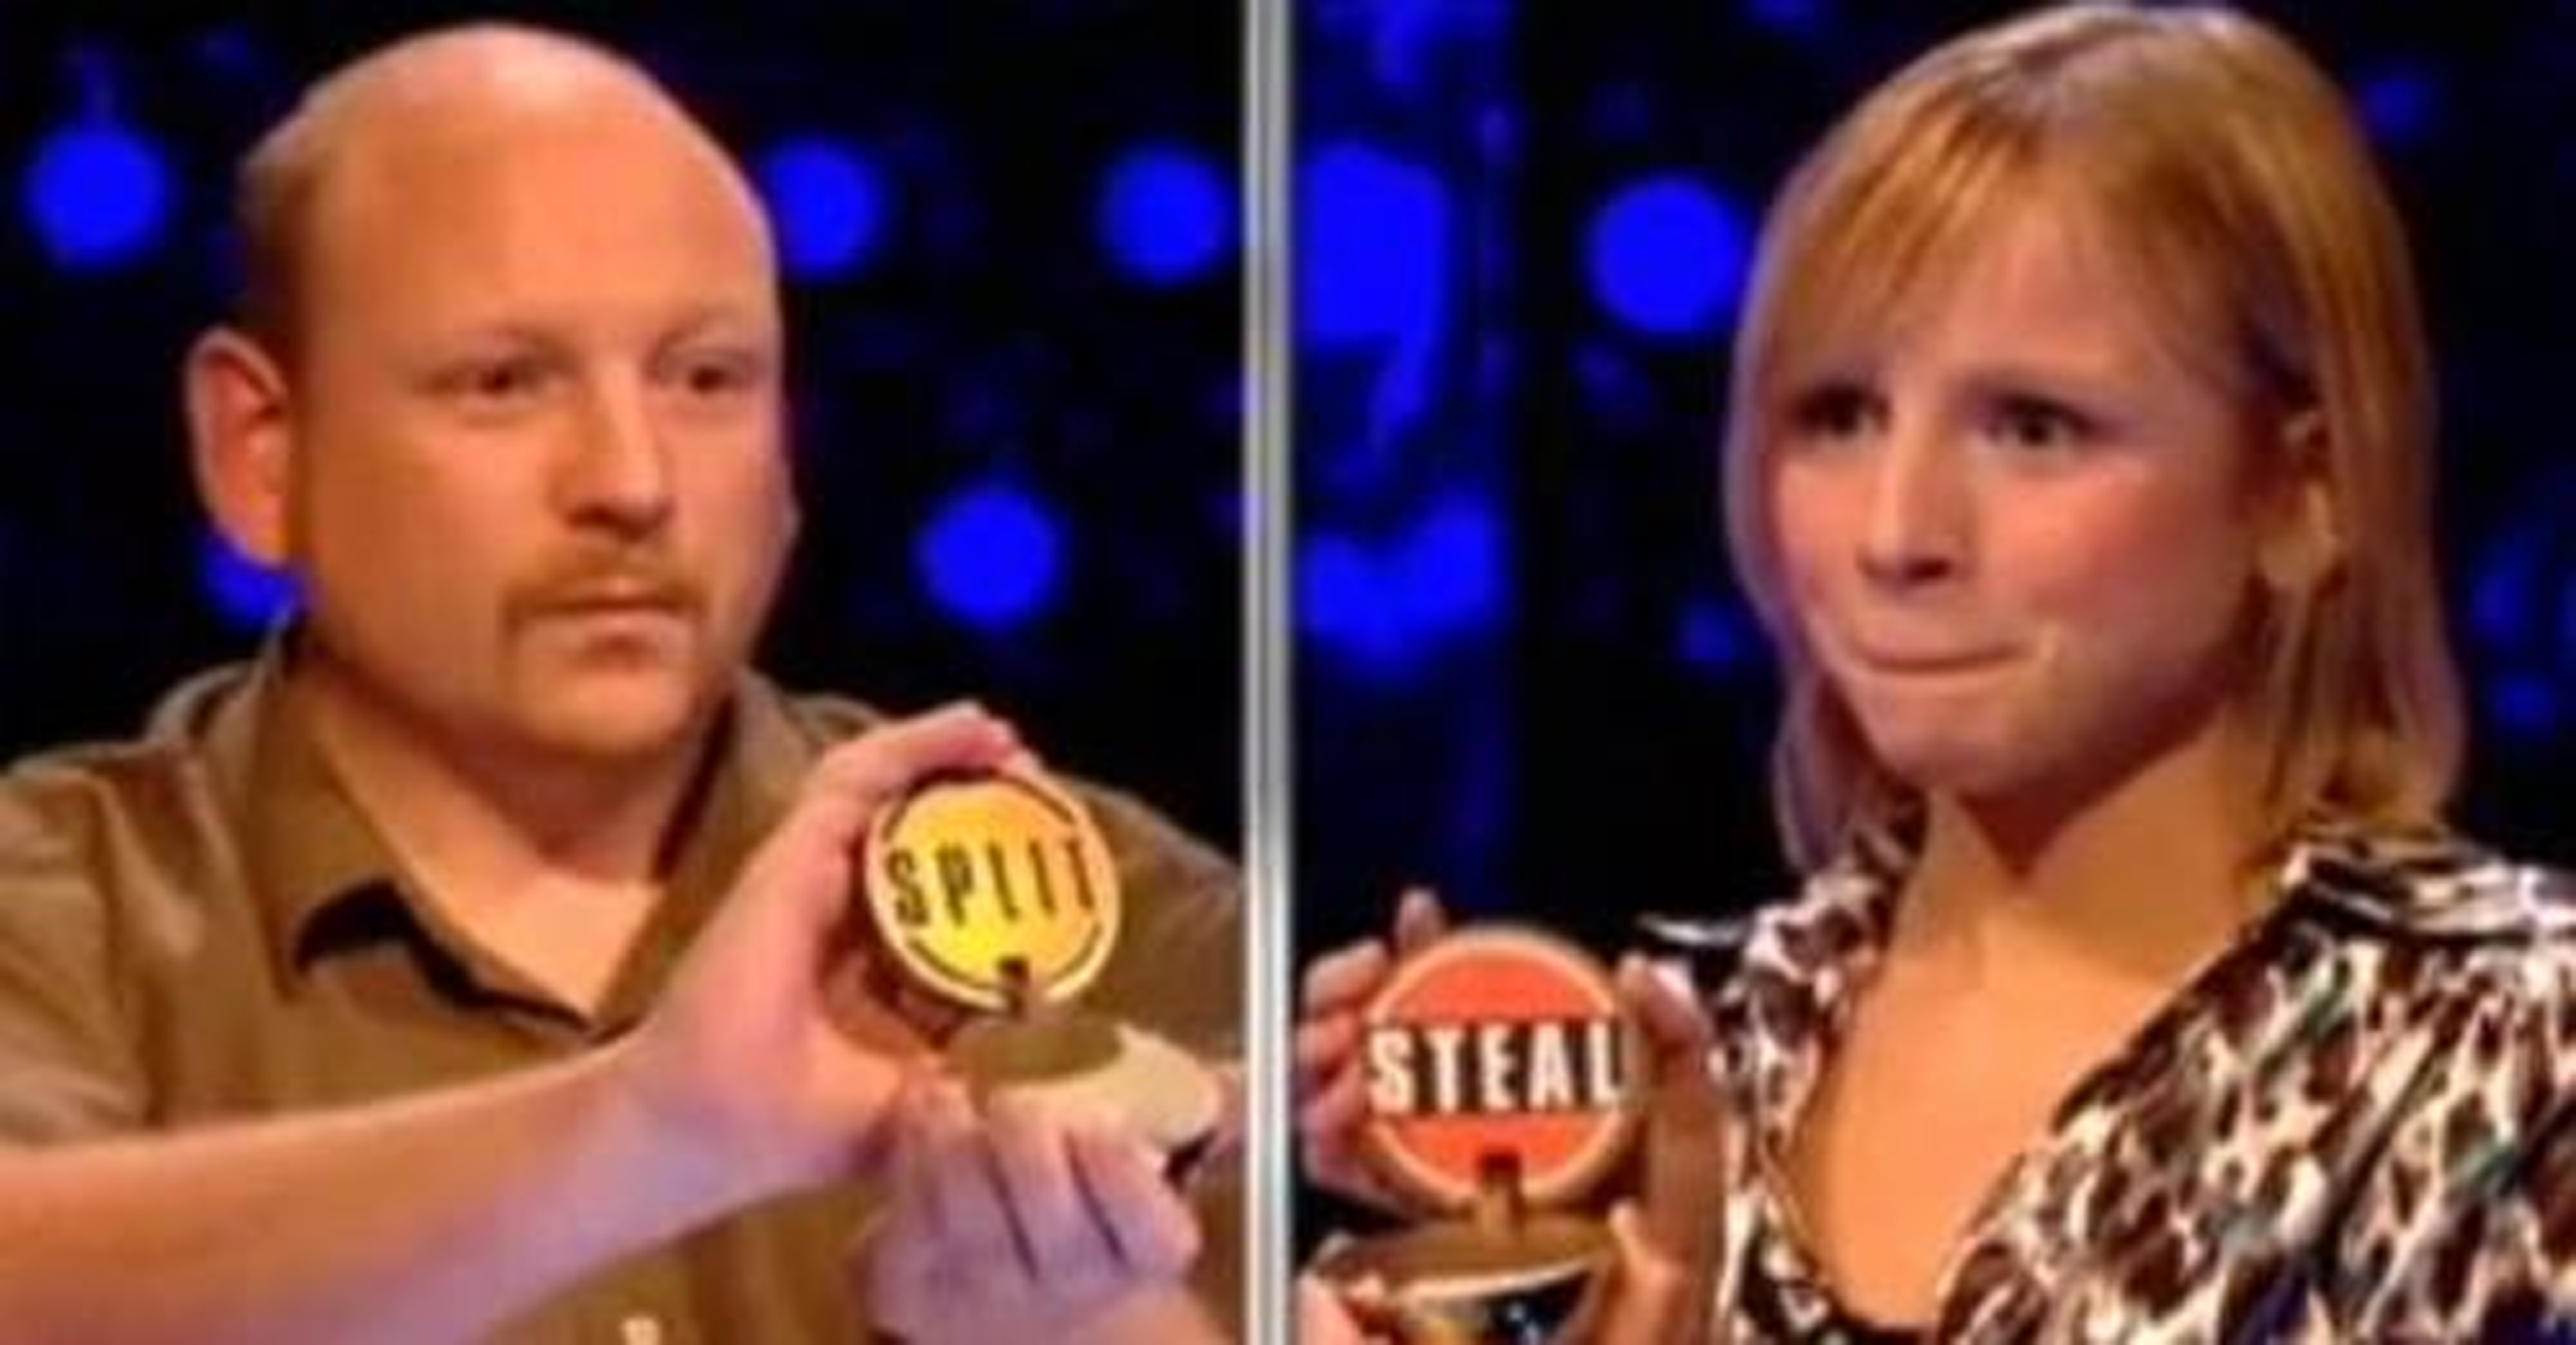 Golden Balls star who lost £100k iconic TV moment says rival didn’t reach out